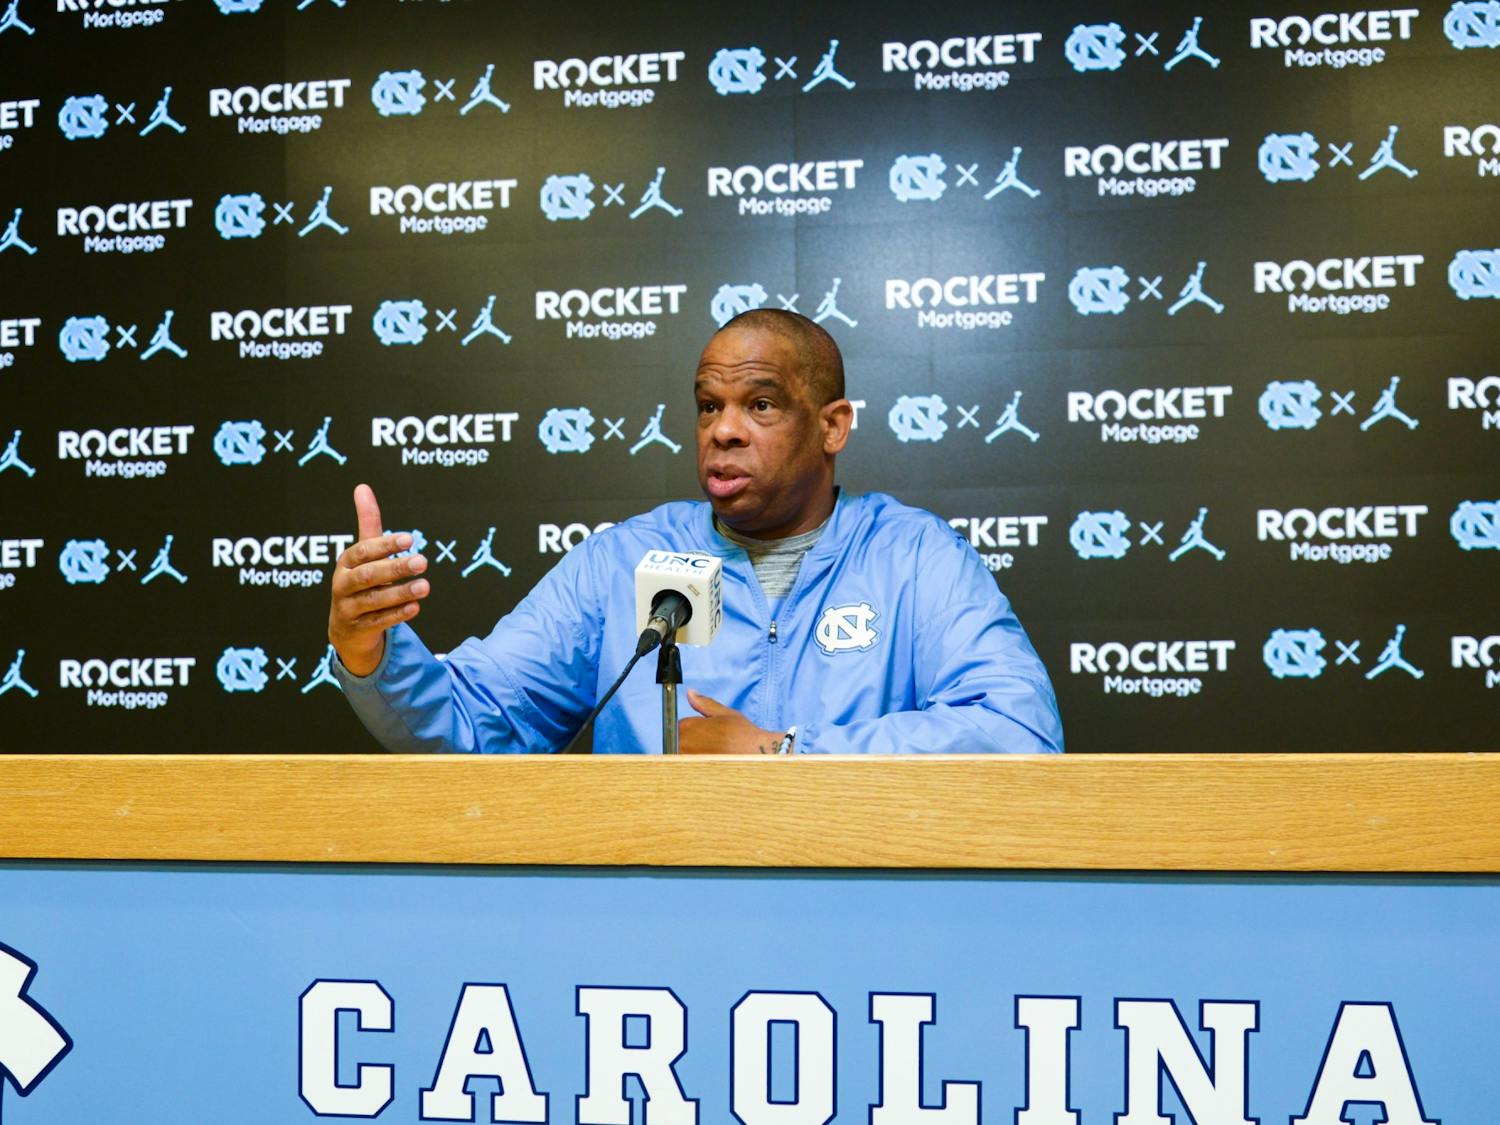 Head coach of the North Carolina Men's Basketball team Hubert Davis speaks at the press conference ahead of the NCAA tournament on March 15, 2022 at the Smith Center.